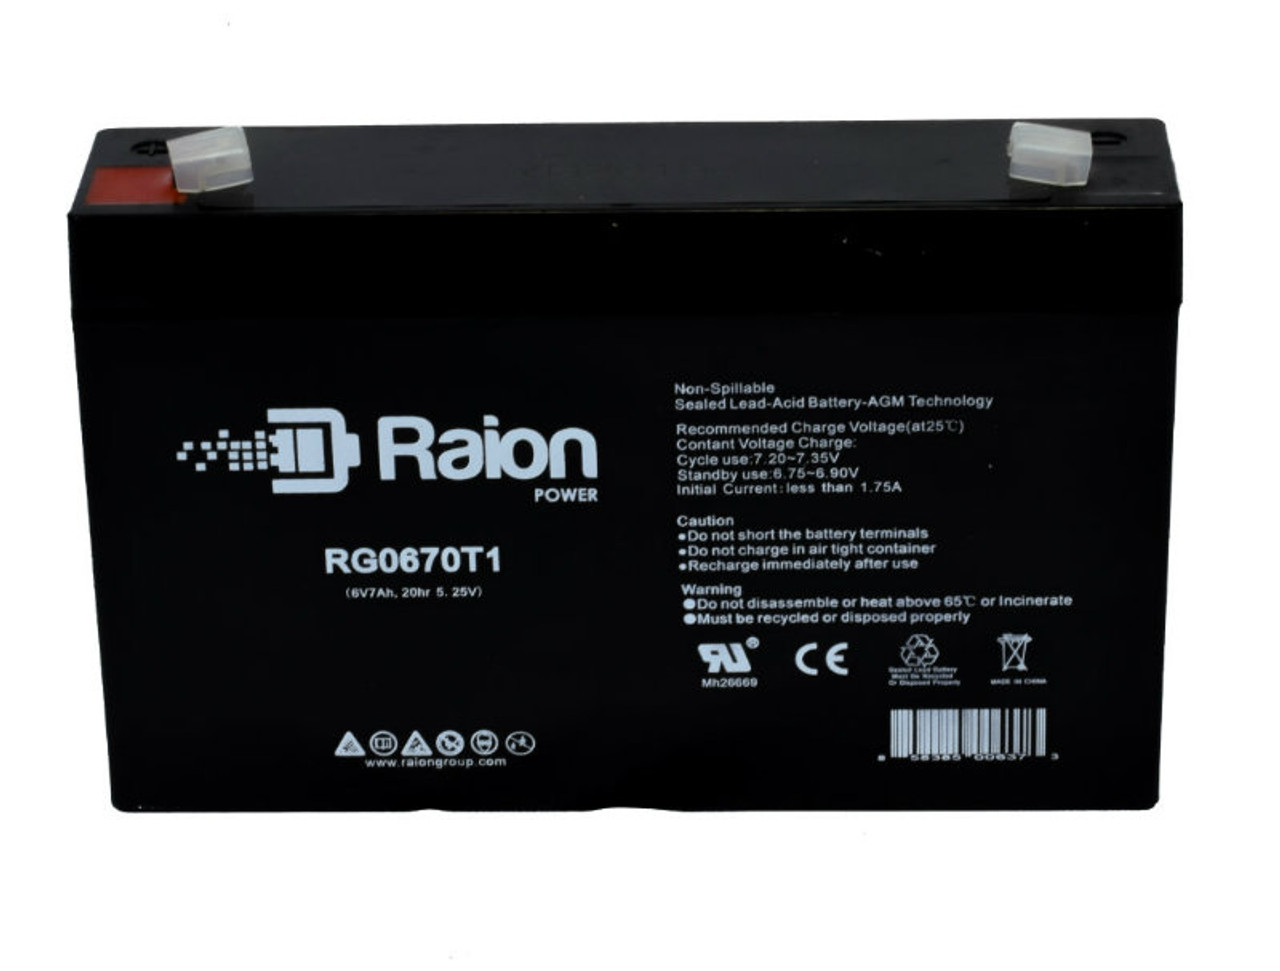 Raion Power RG0670T1 Replacement Battery Cartridge for National Power Corporation GS013P2